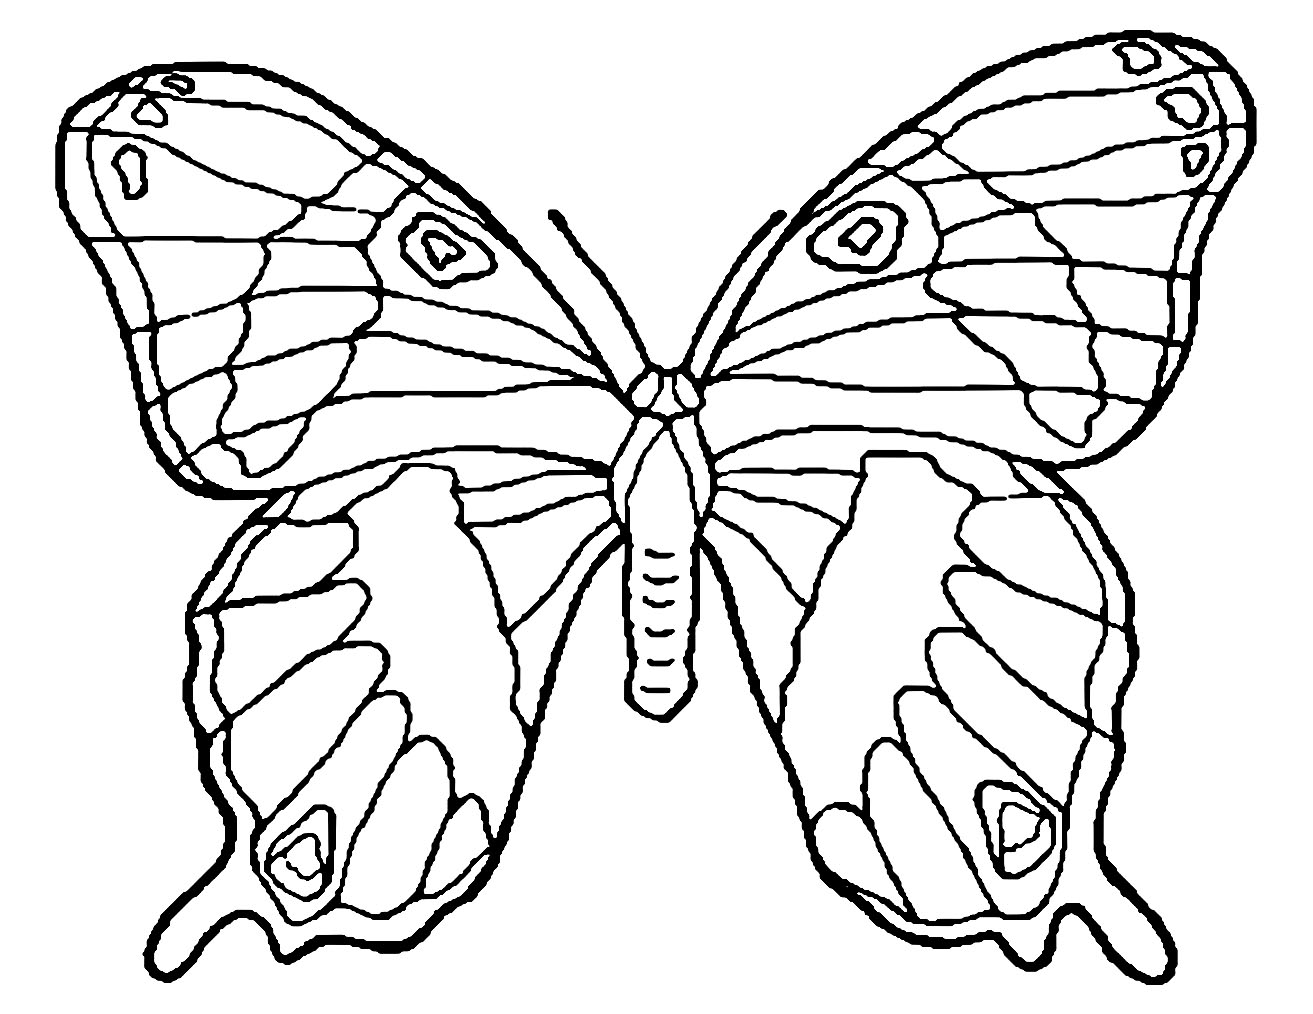 Butterfly drawing to color - Butterflies Kids Coloring Pages